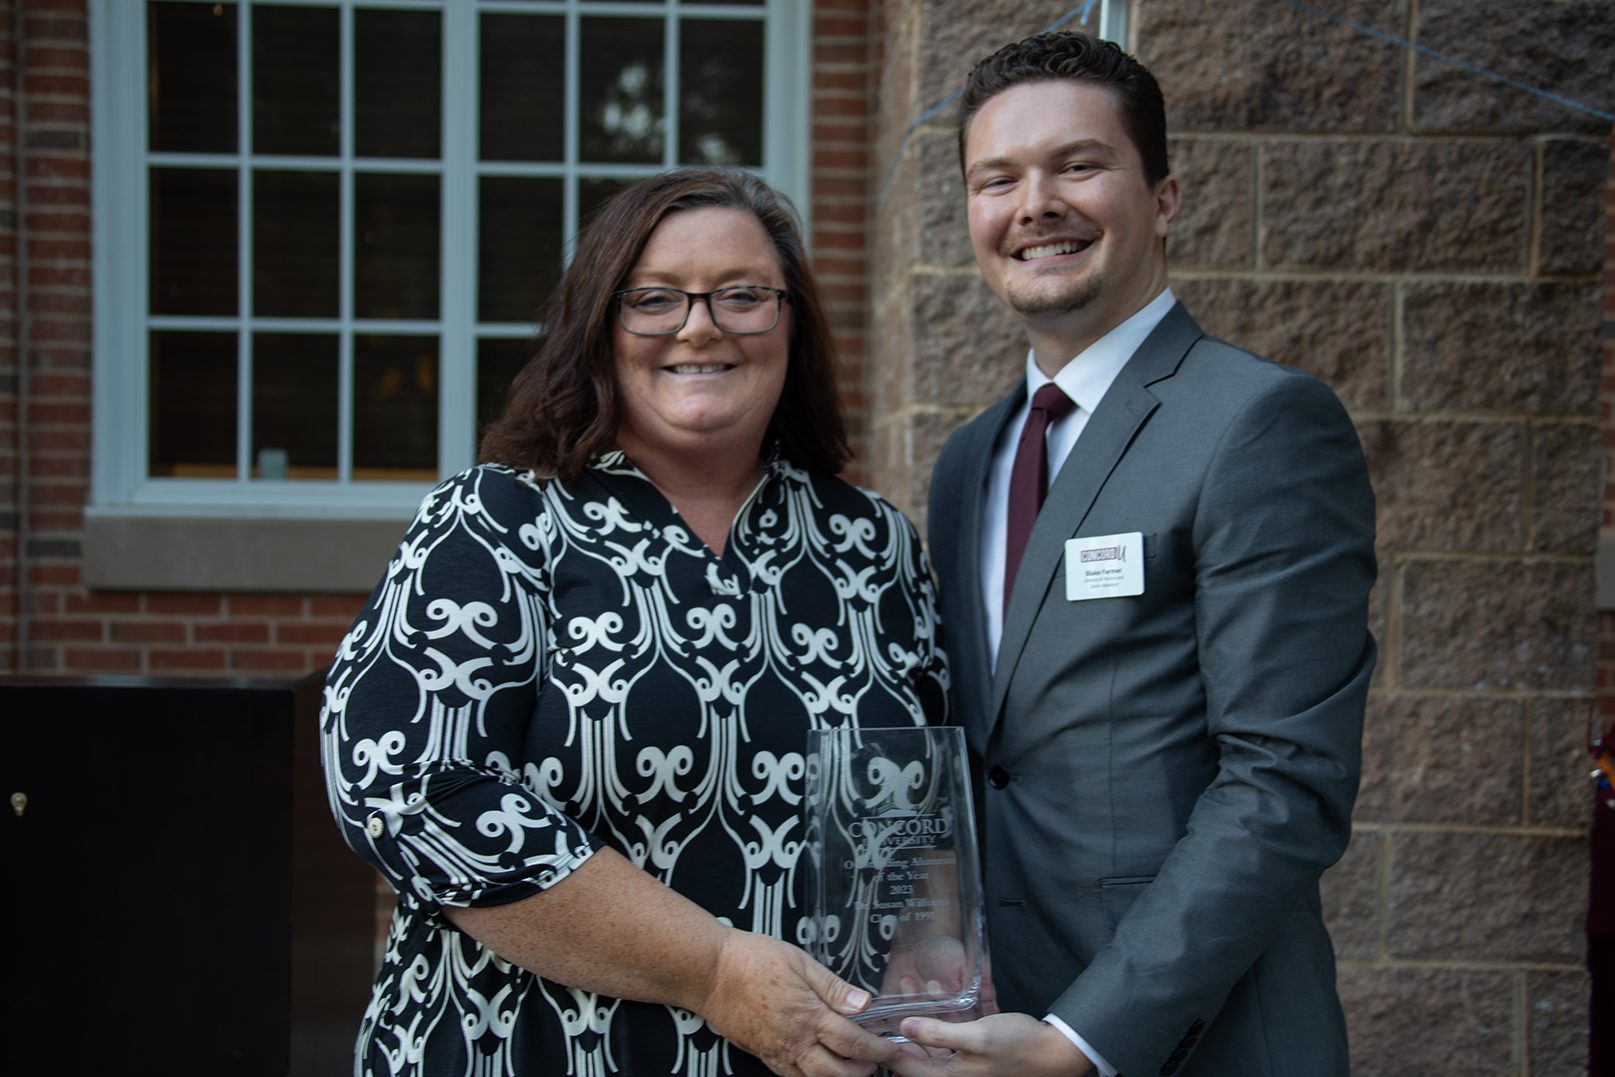 Outstanding Alumnus 2023, Dr. Susan Williams ‘91 pictured with Blake Farmer, Director of Alumni and Donor Relations